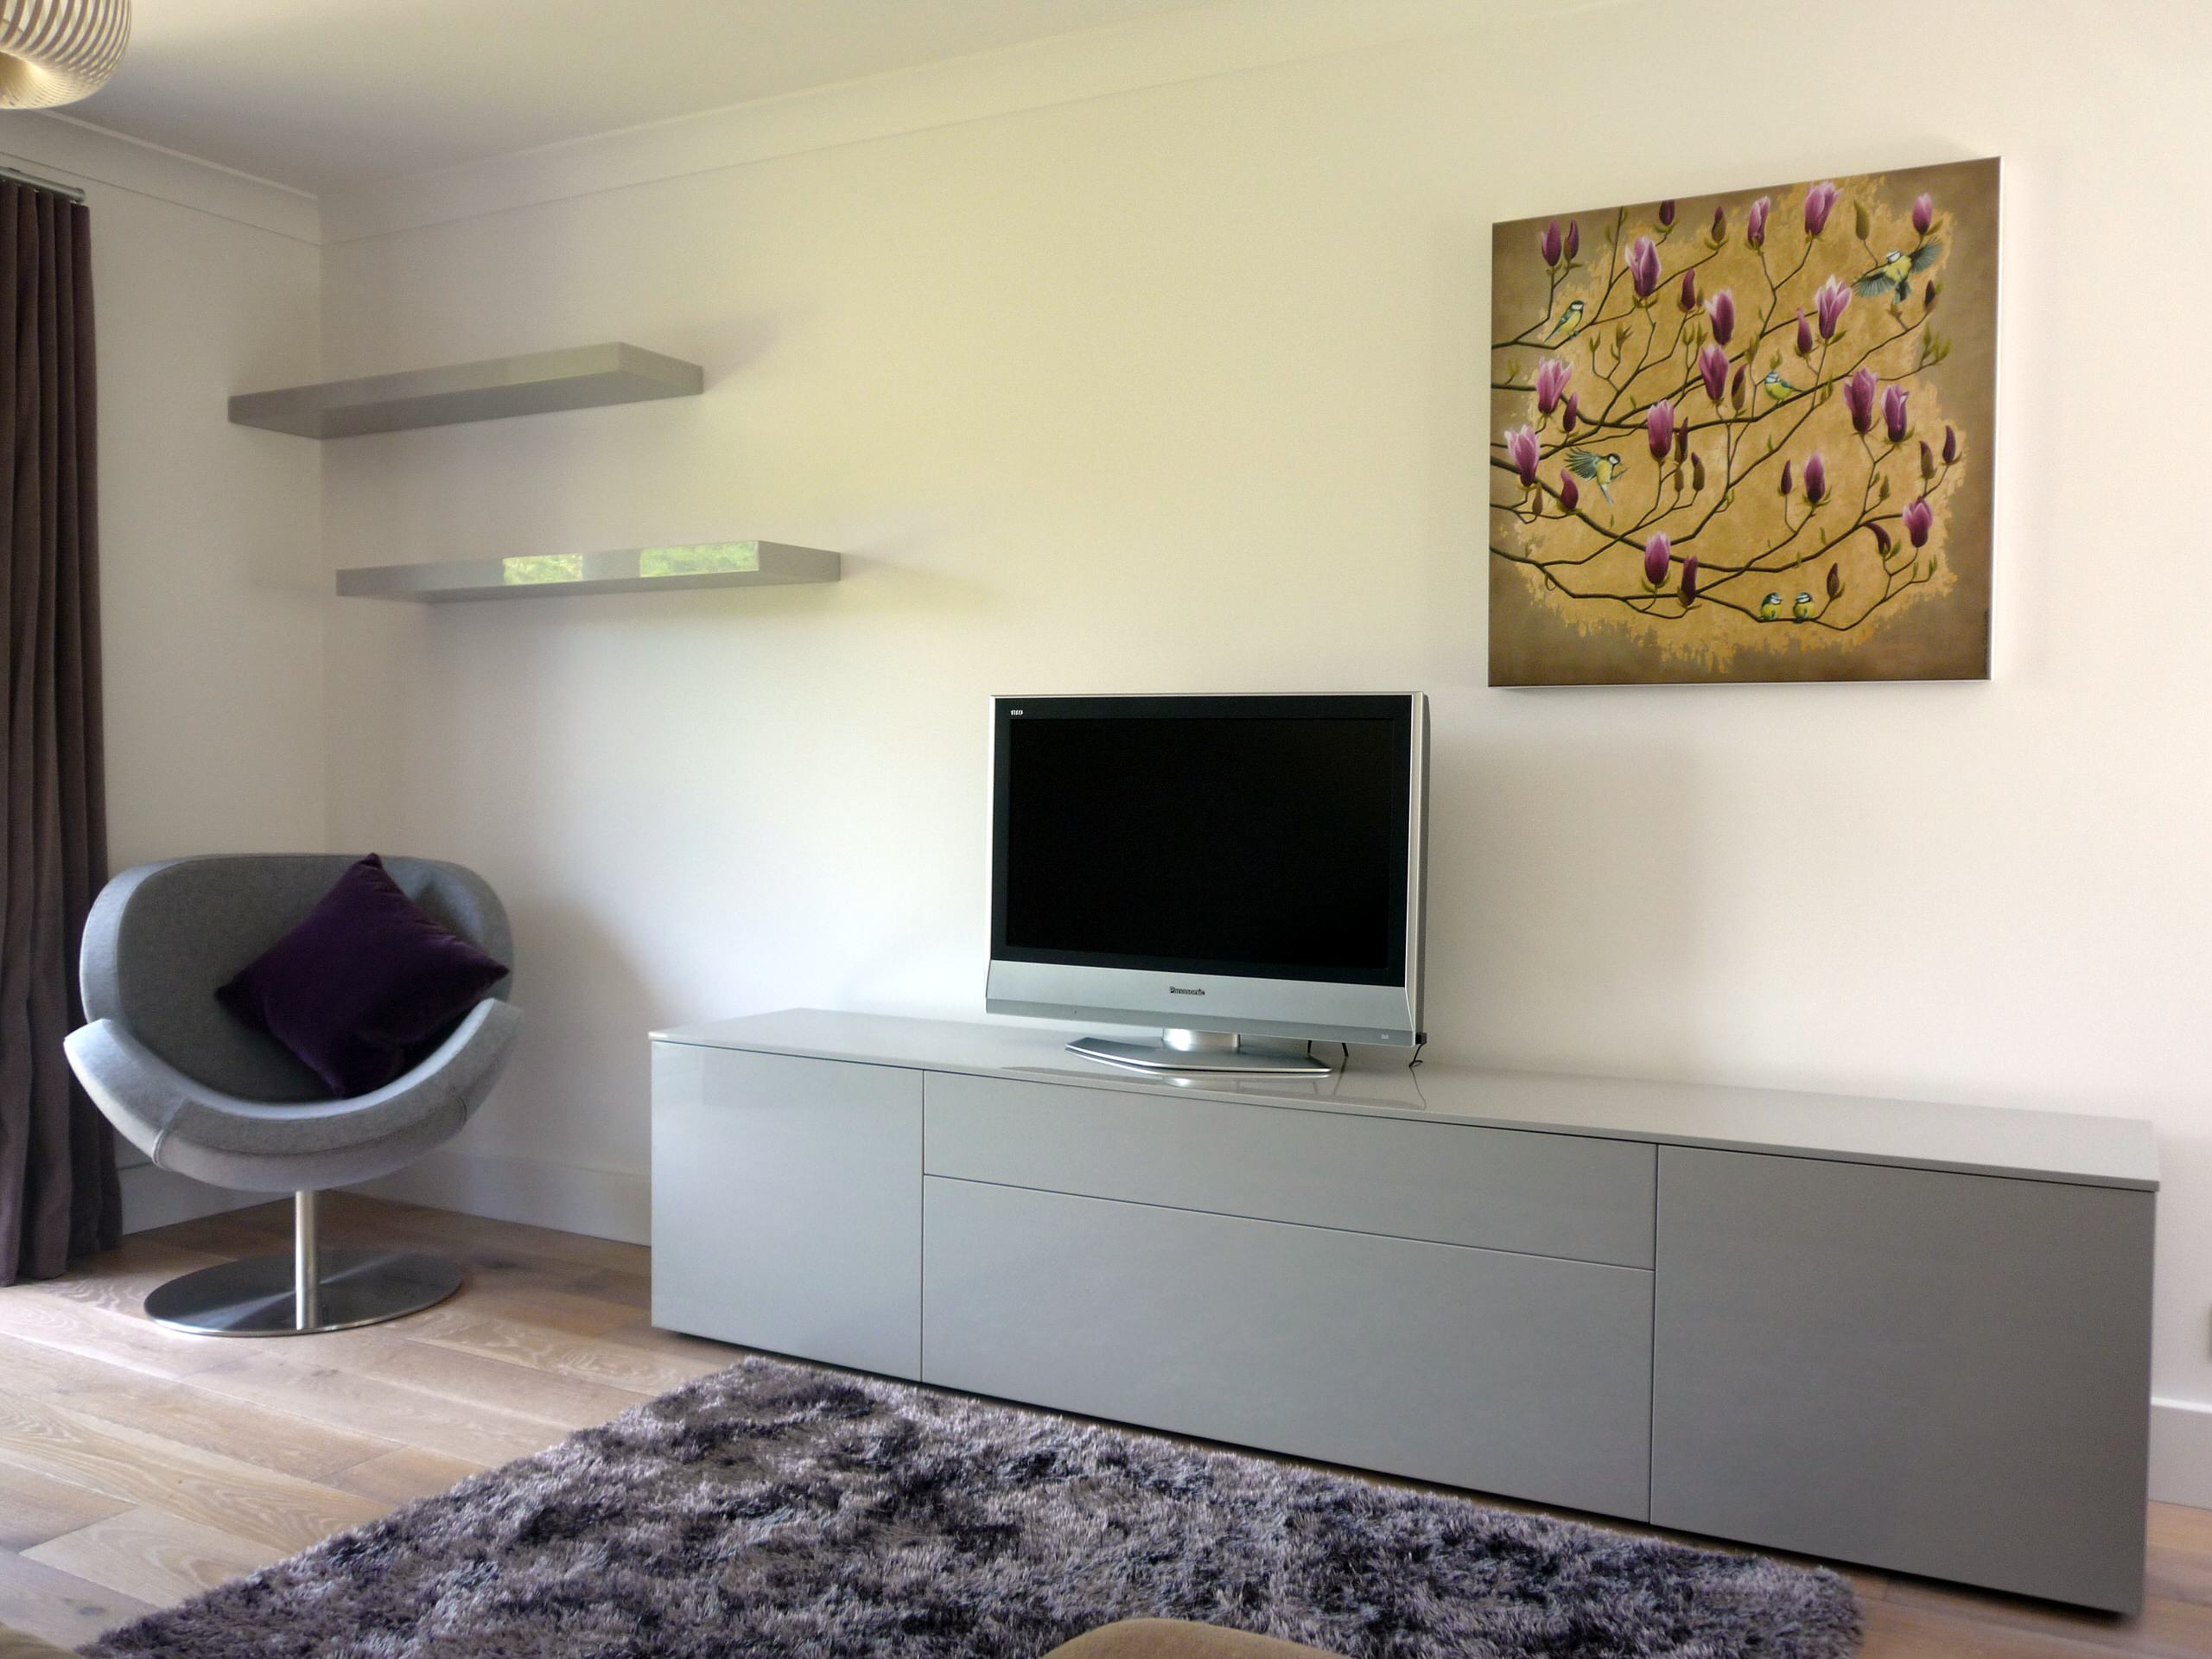 Sidcup: Contemporary Lounge